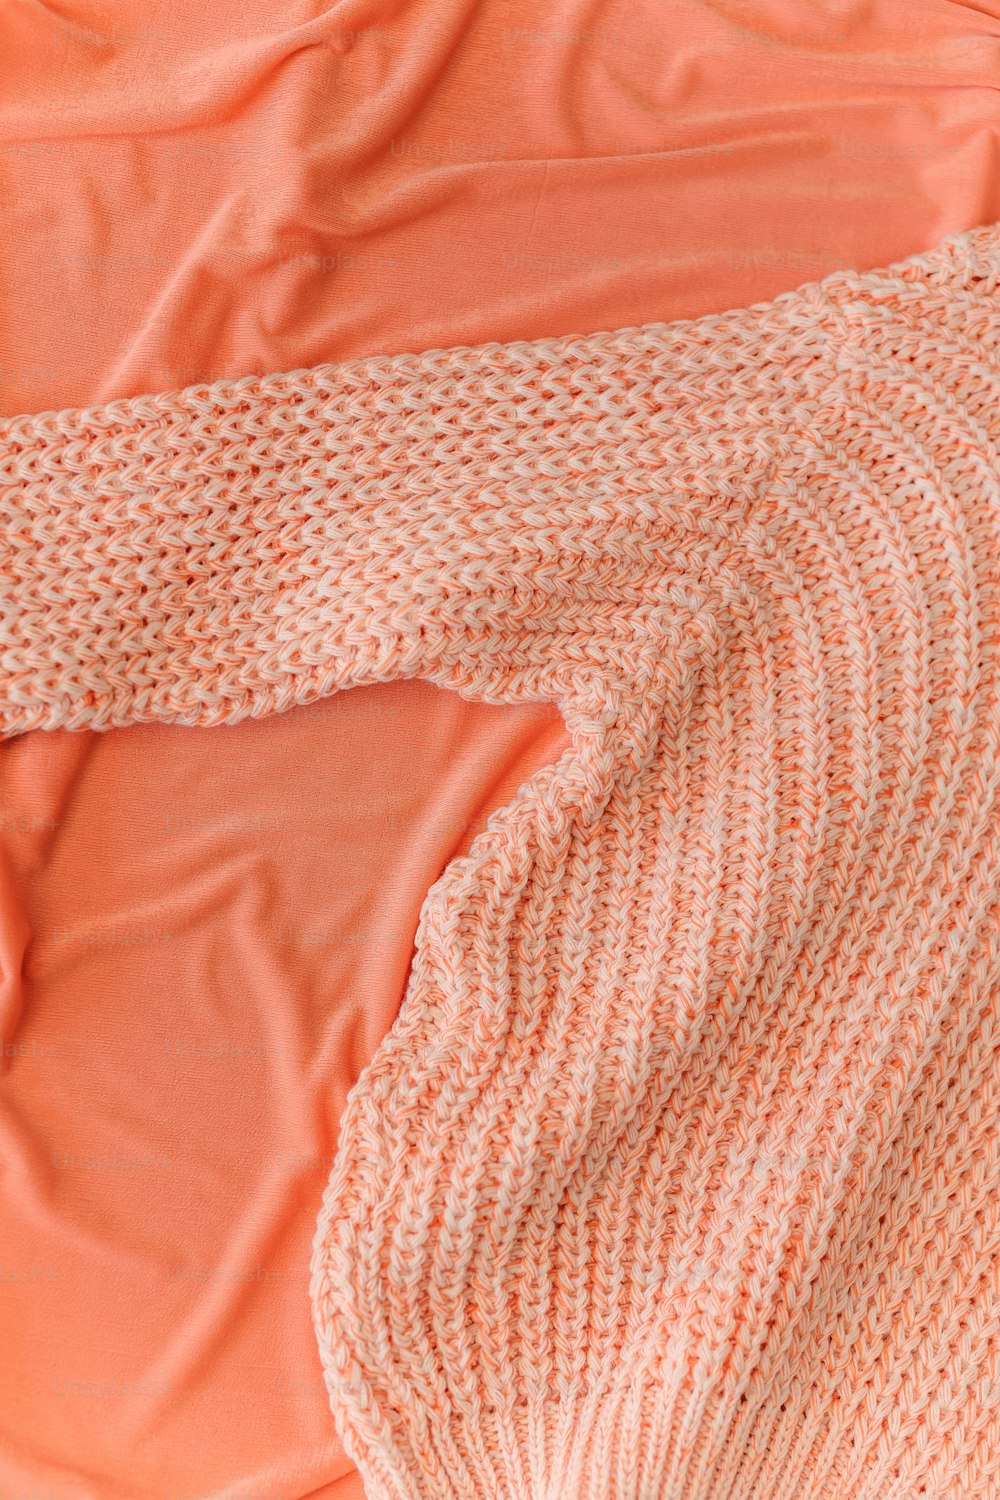 a sweater laying on top of an orange sheet